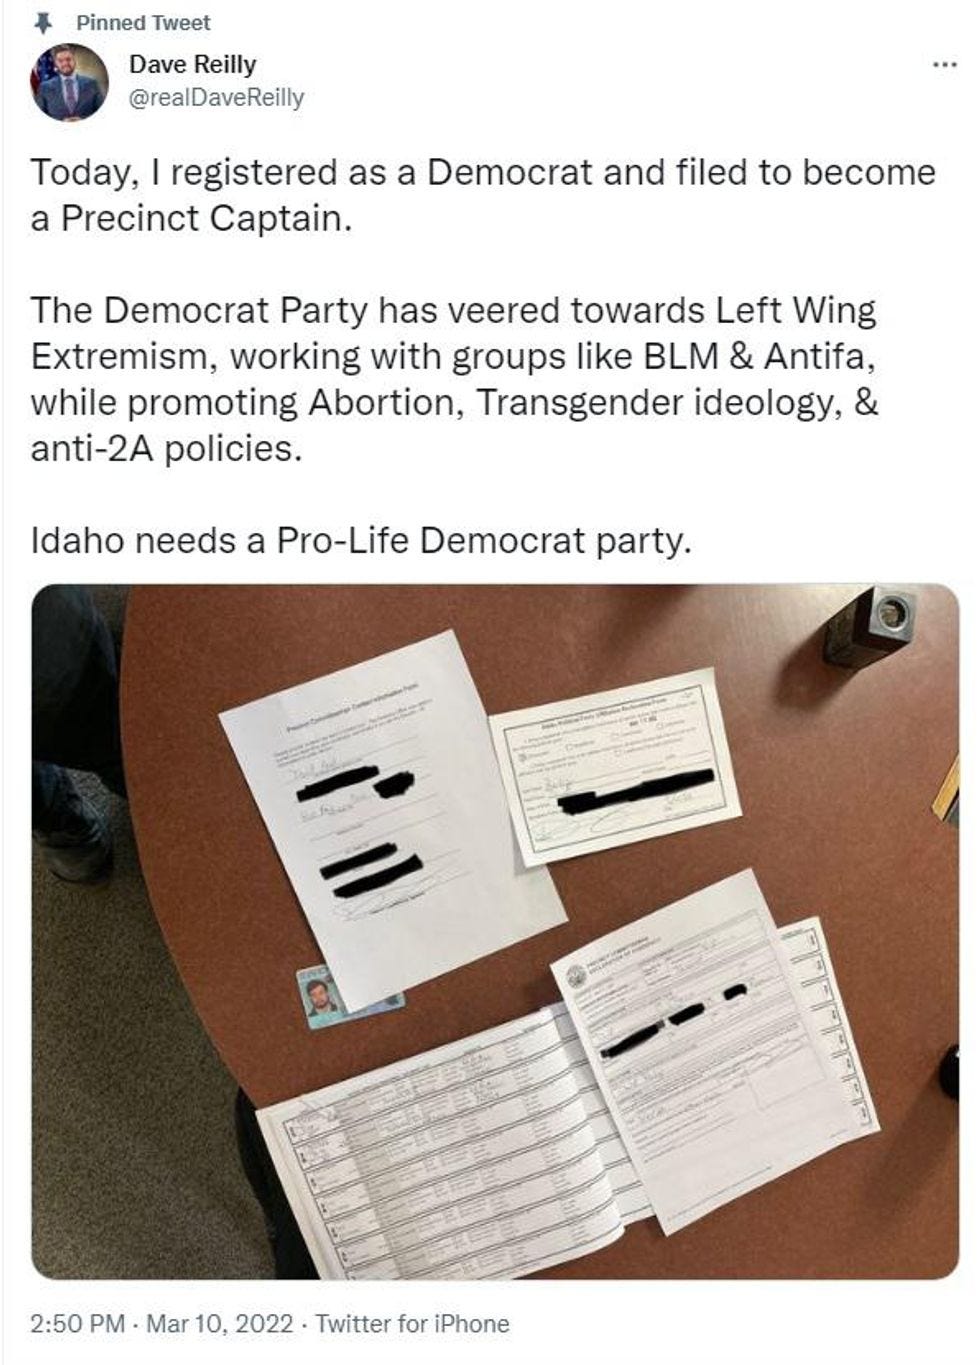 Text of tweet: "Today, I registered as a Democrat and filed to become a Precinct Captain.  The Democrat Party has veered towards Left Wing Extremism, working with groups like BLM & Antifa, while promoting Abortion, Transgender ideology, & anti-2A policies.  Idaho needs a Pro-Life Democrat party."